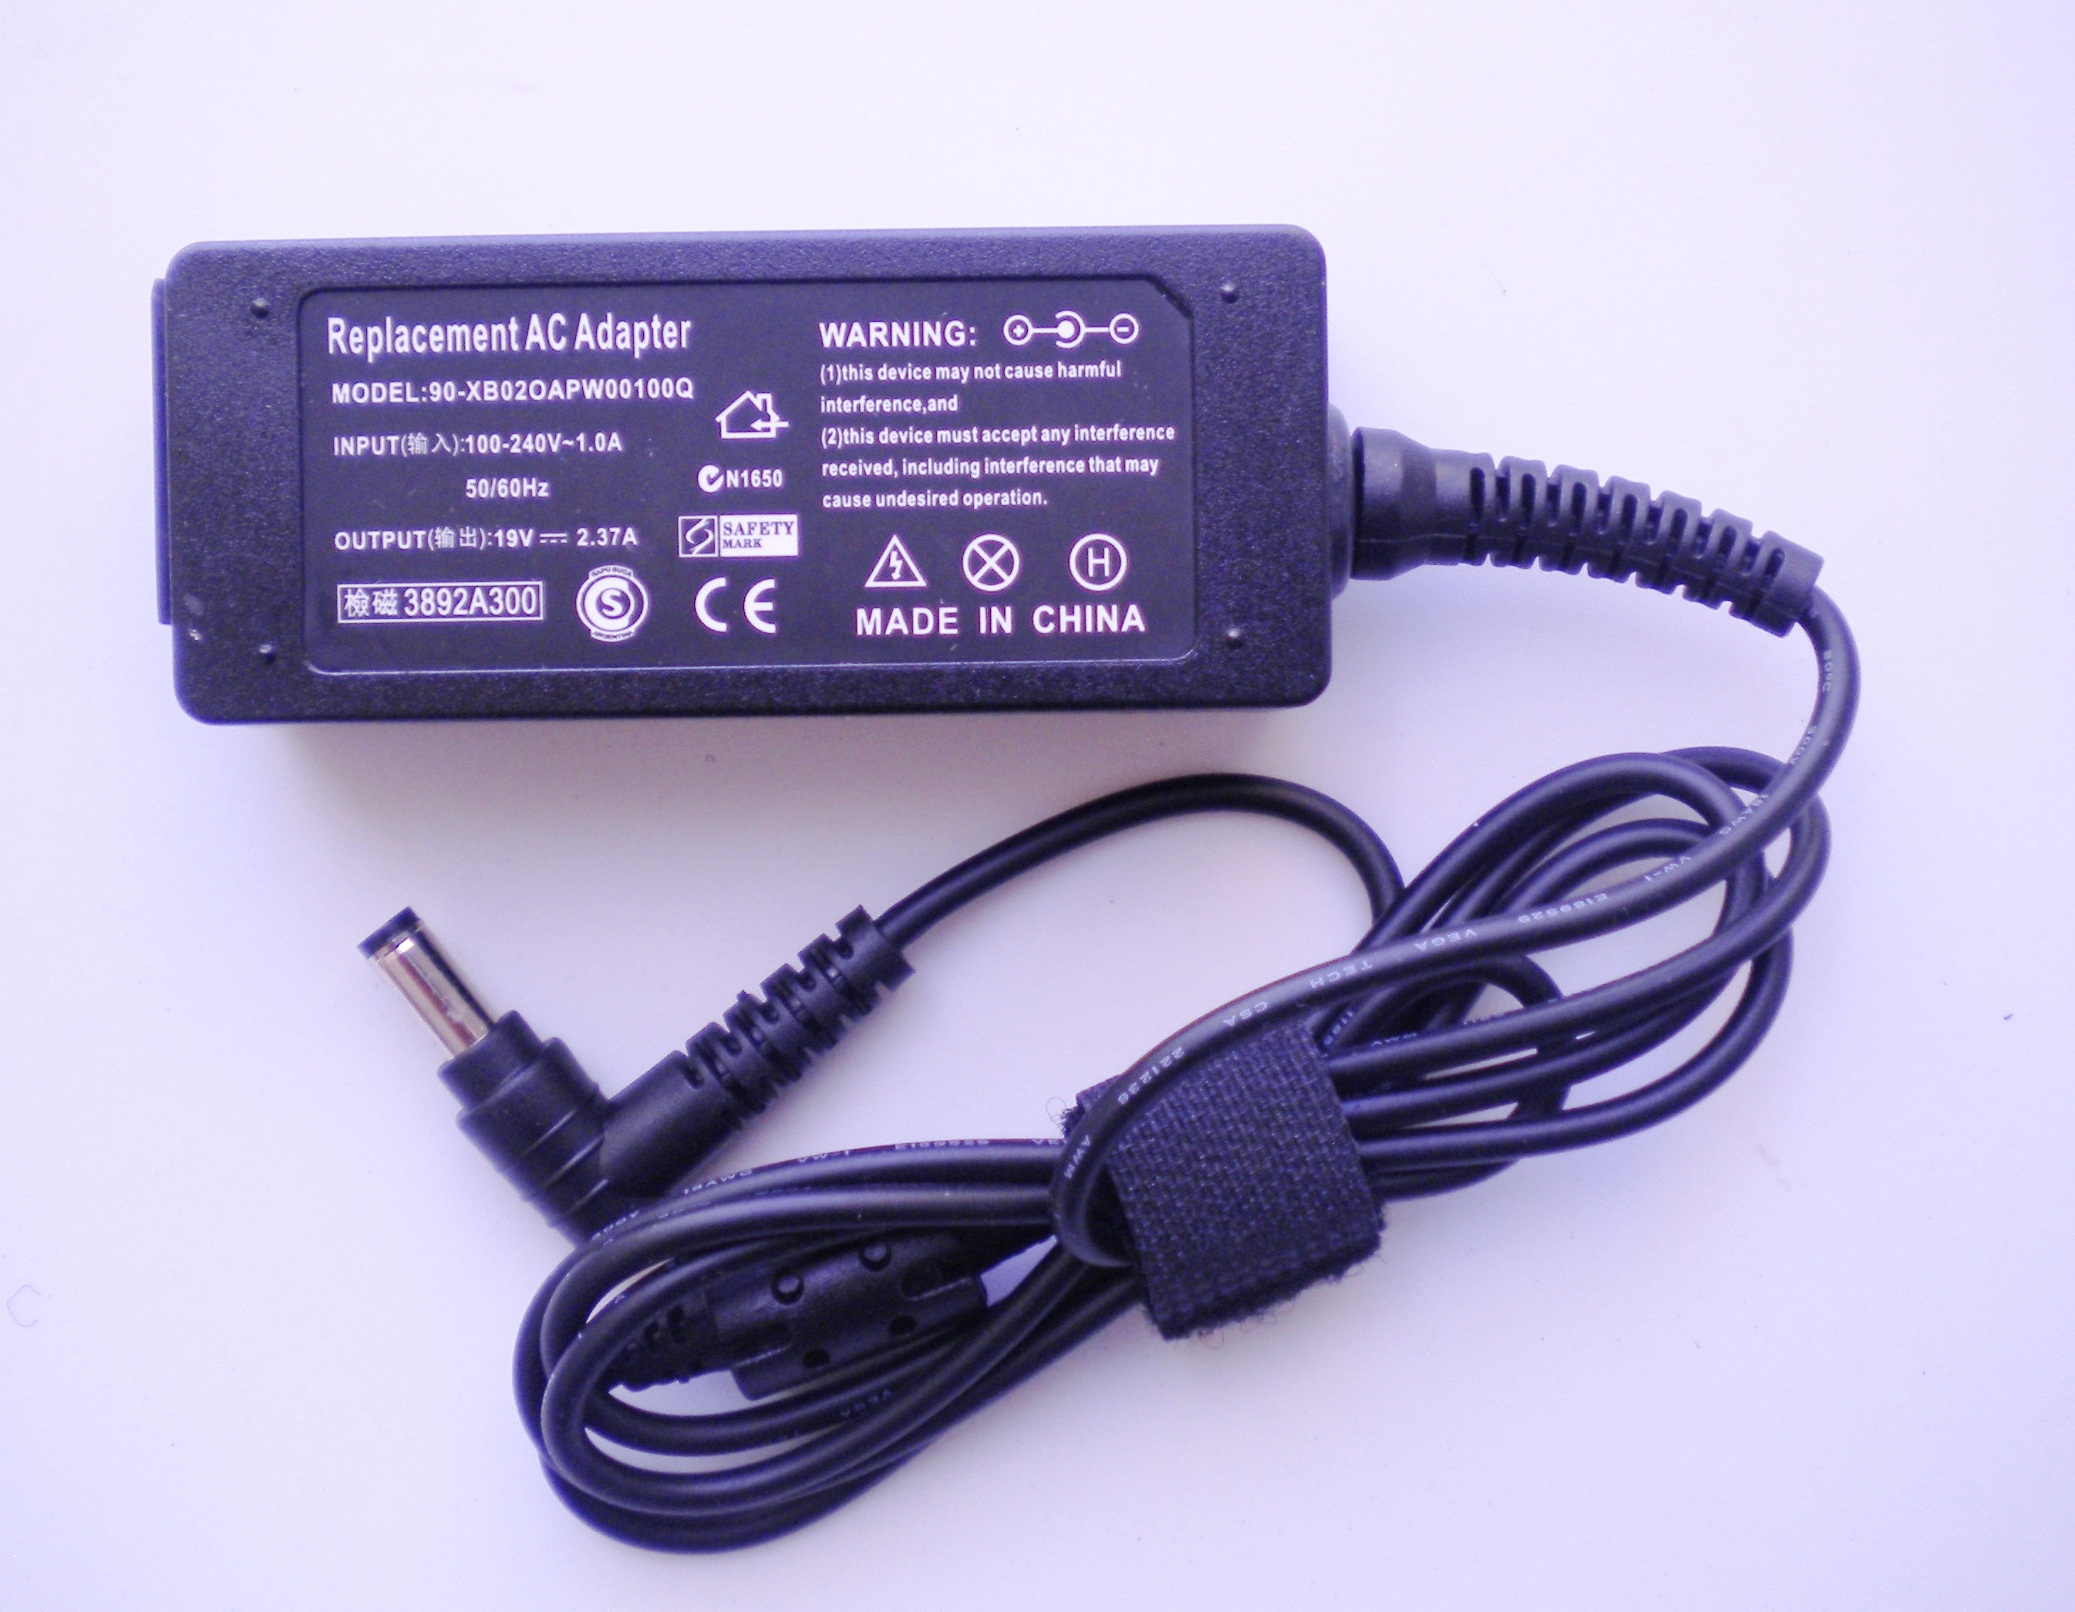 For Toshiba 19V 2.37A (45W) 5.5mm X 2.5mm Power Adapter